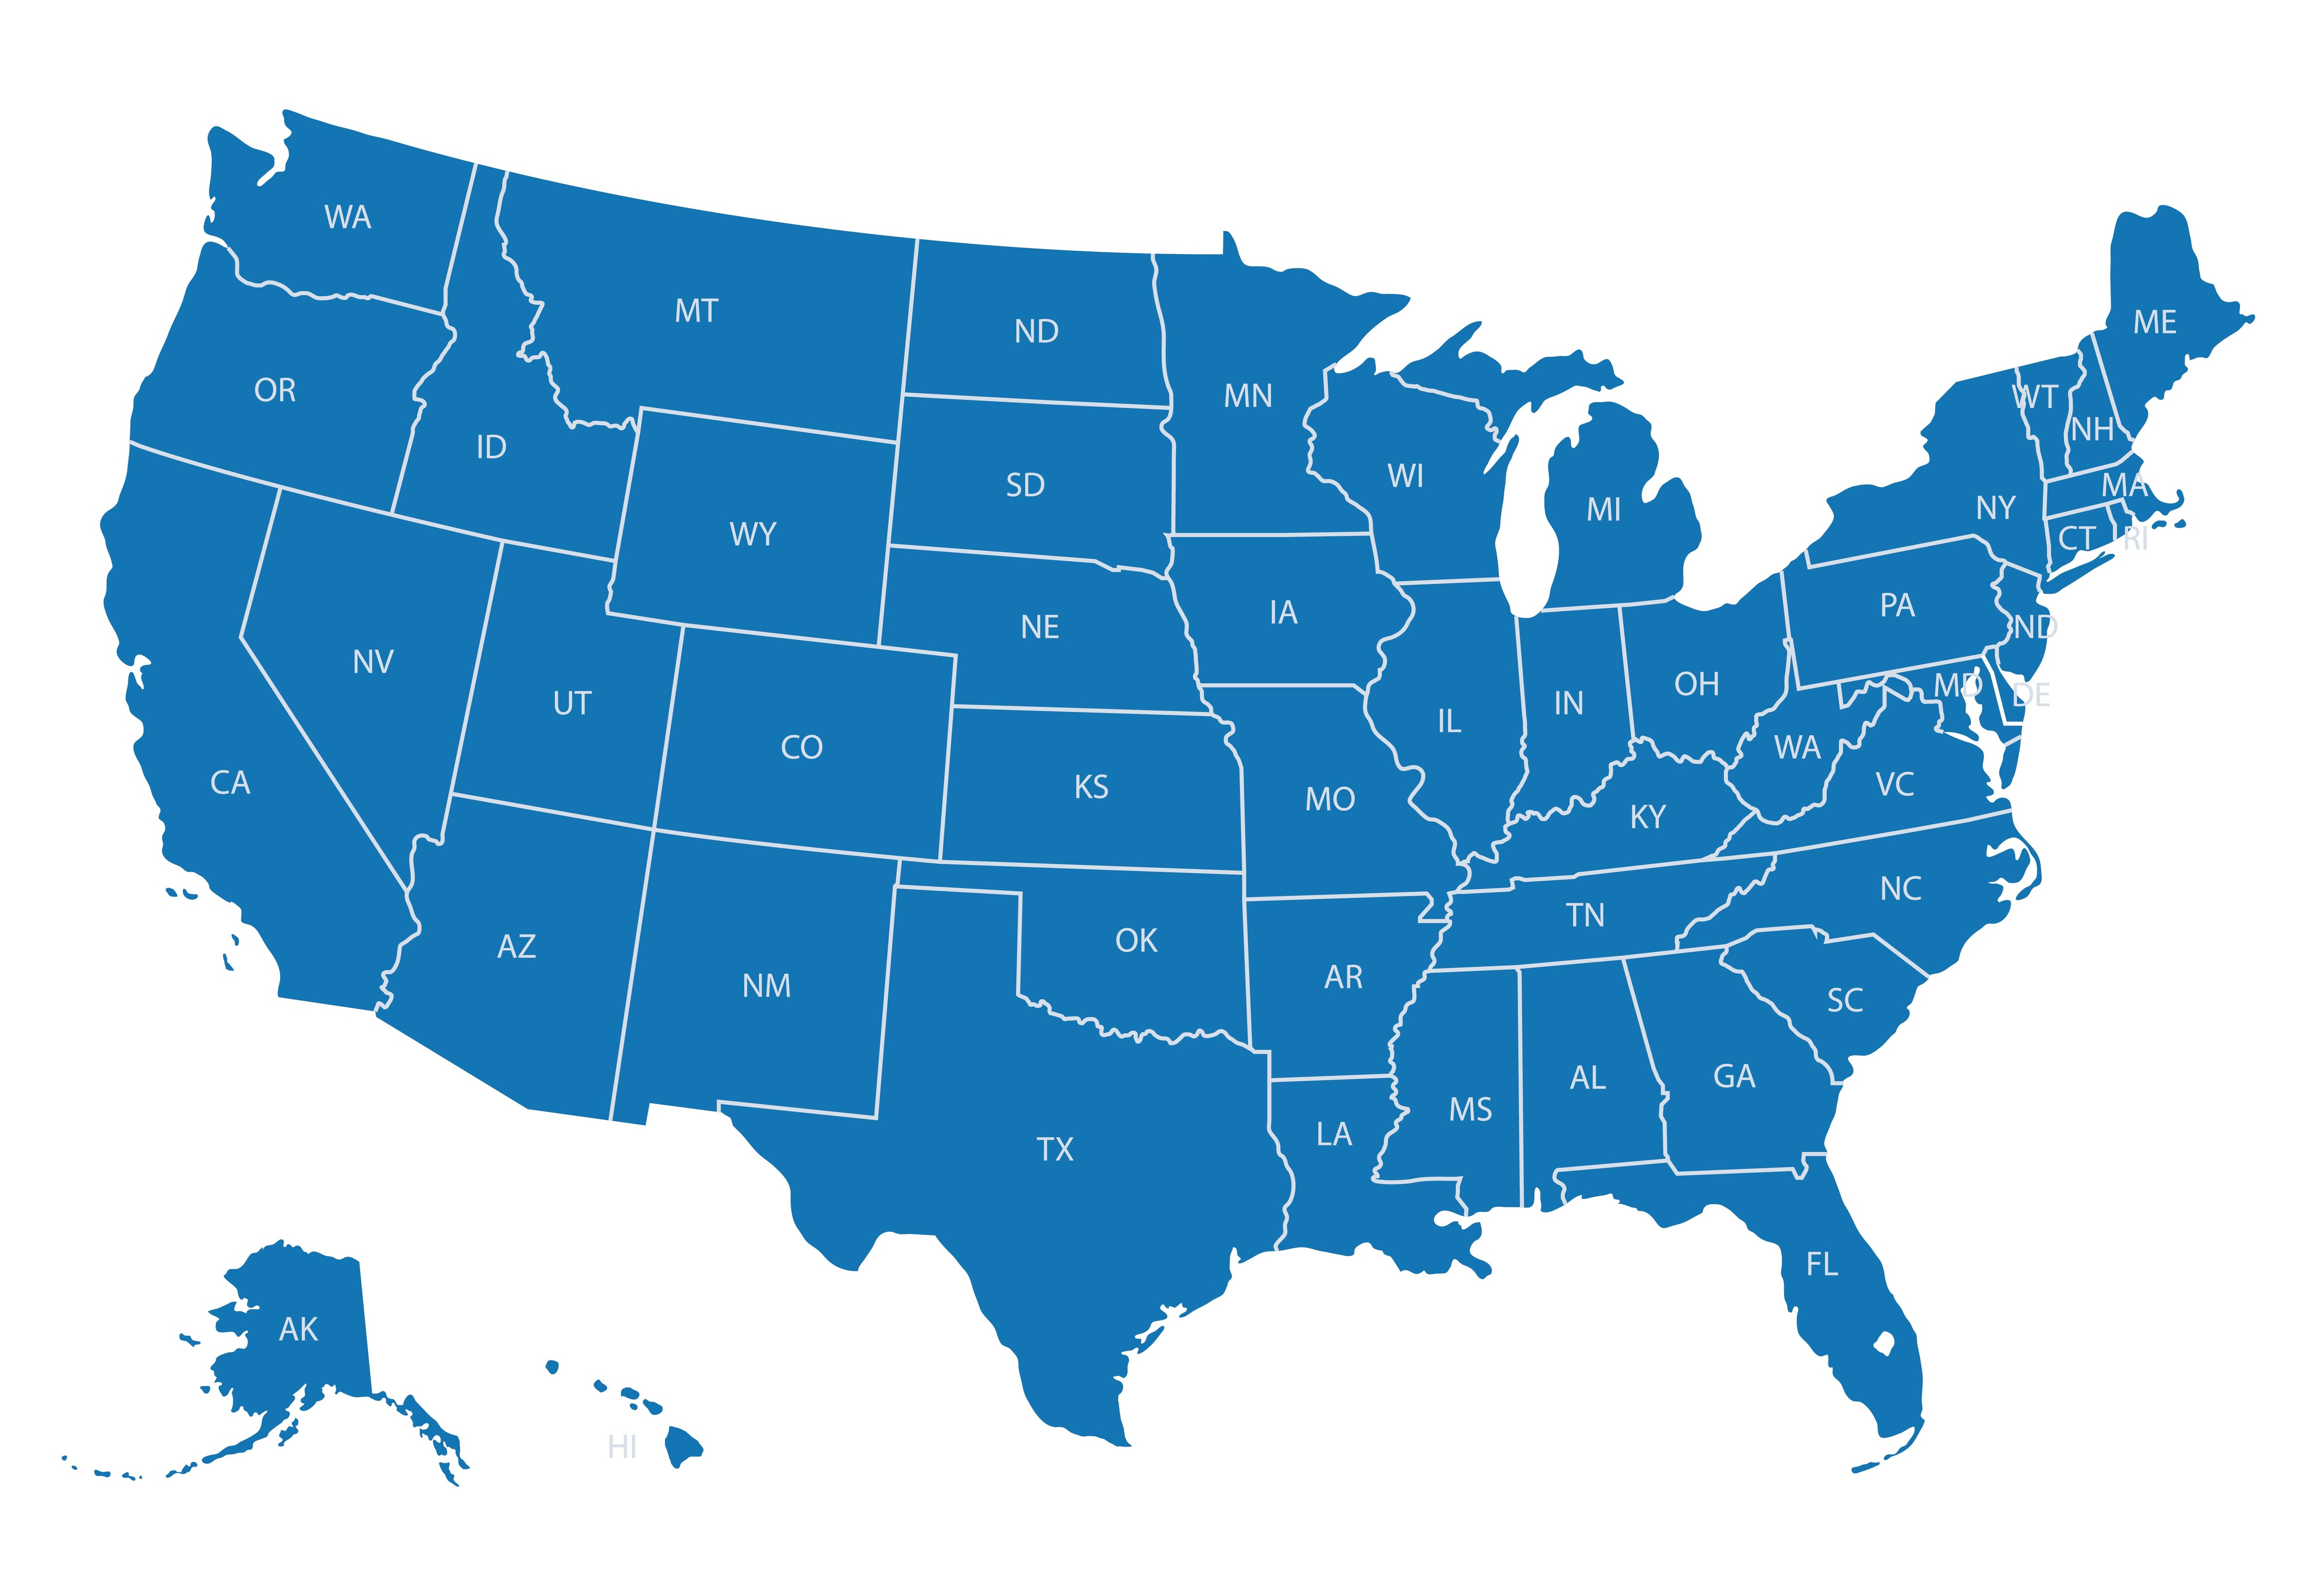 A blue map of the United States with state abbreviations labeled.